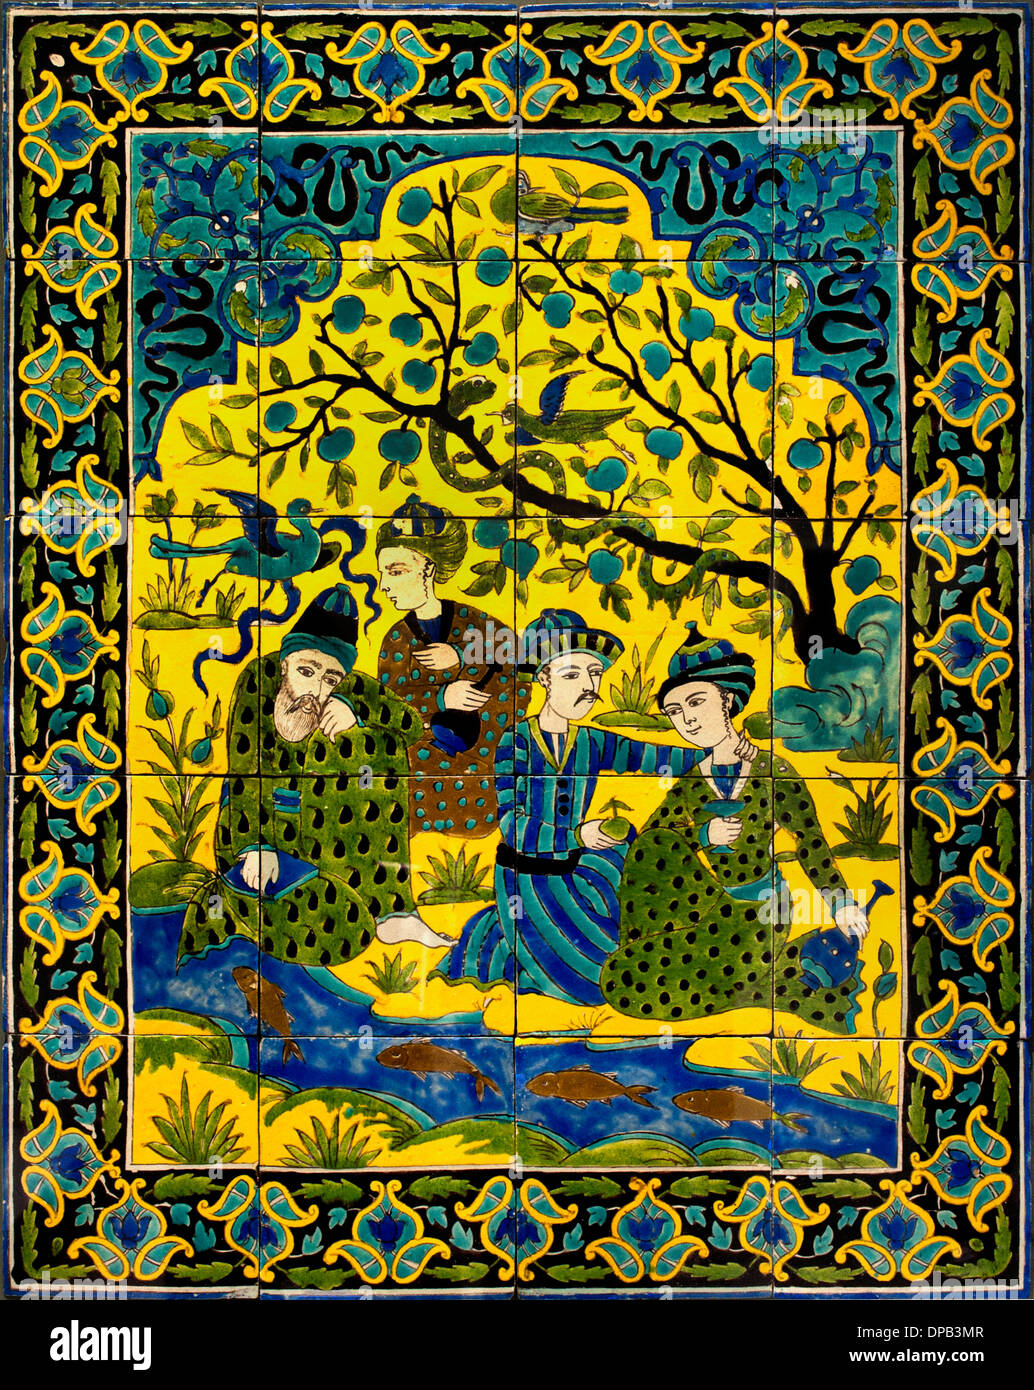 Panel siding: an assembly of mystical 1700-1800 Iran to ceramic decor black lines and colored glazes tile tiles Peria Persian Ir Stock Photo